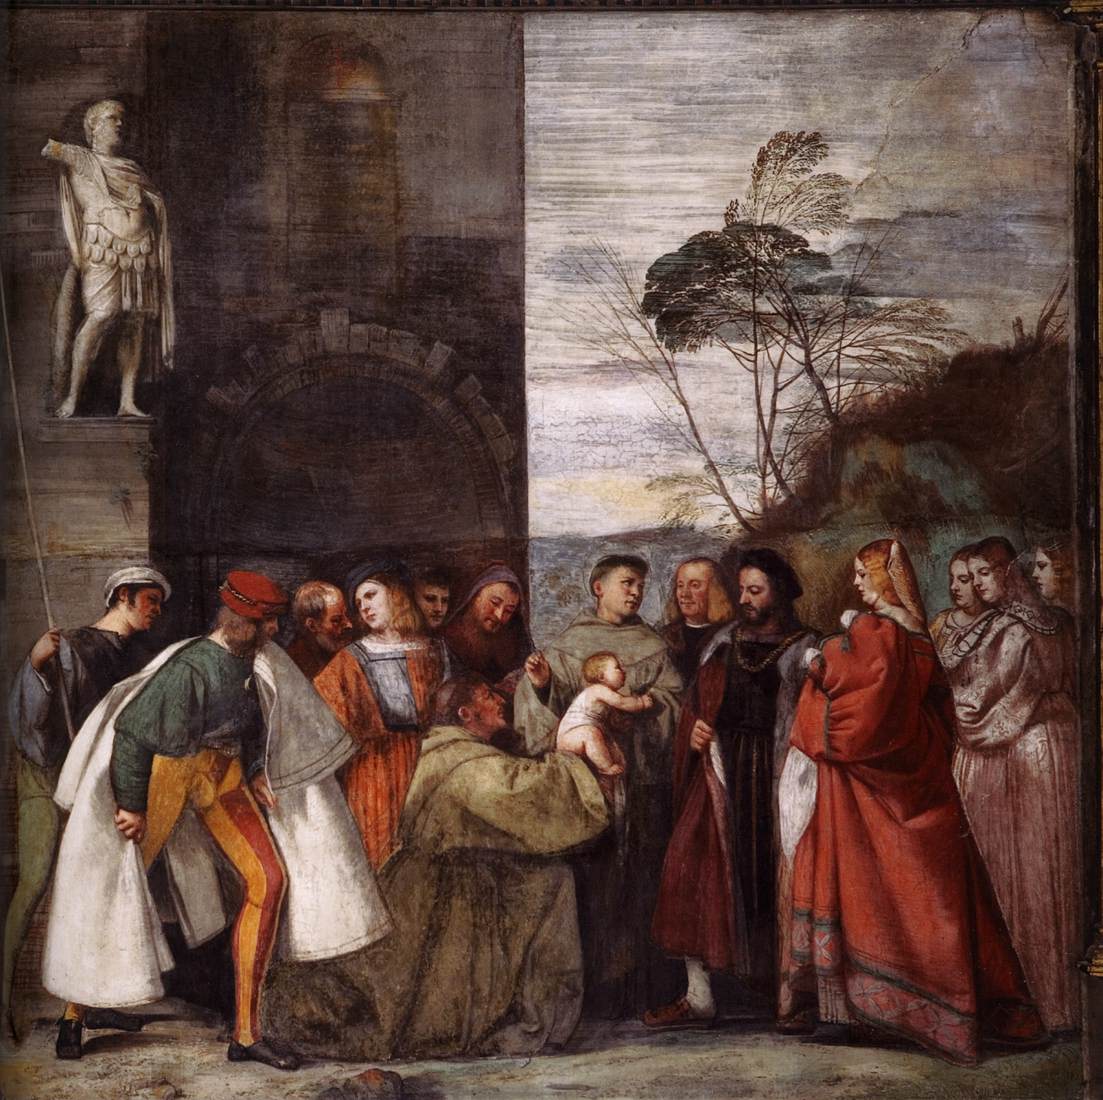 Titian, The miracle of the newborn child.